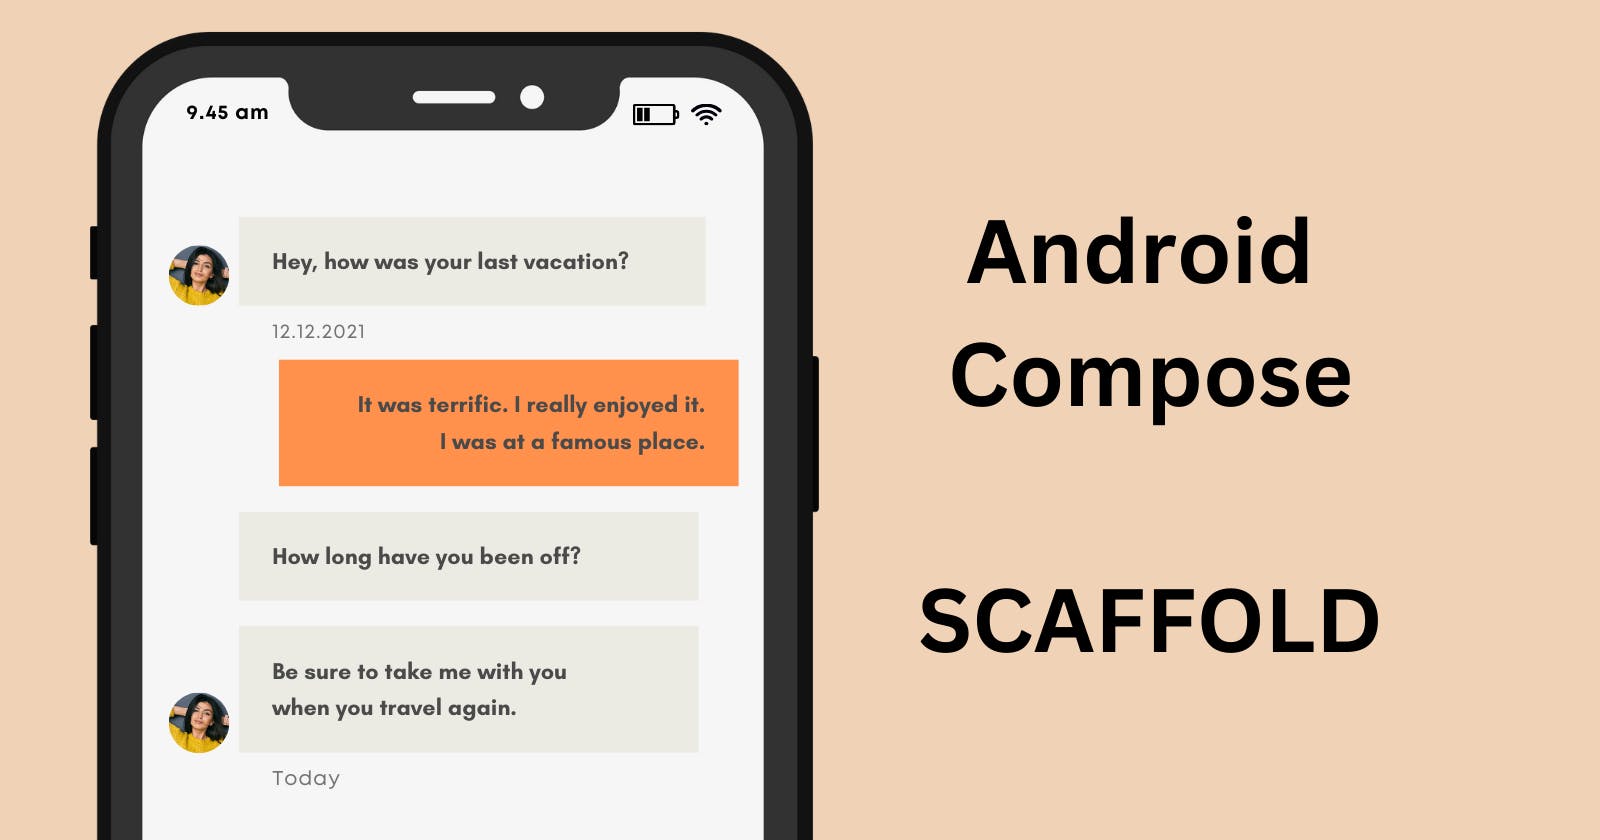 Example of Android Scaffold Structure in Android Compose API